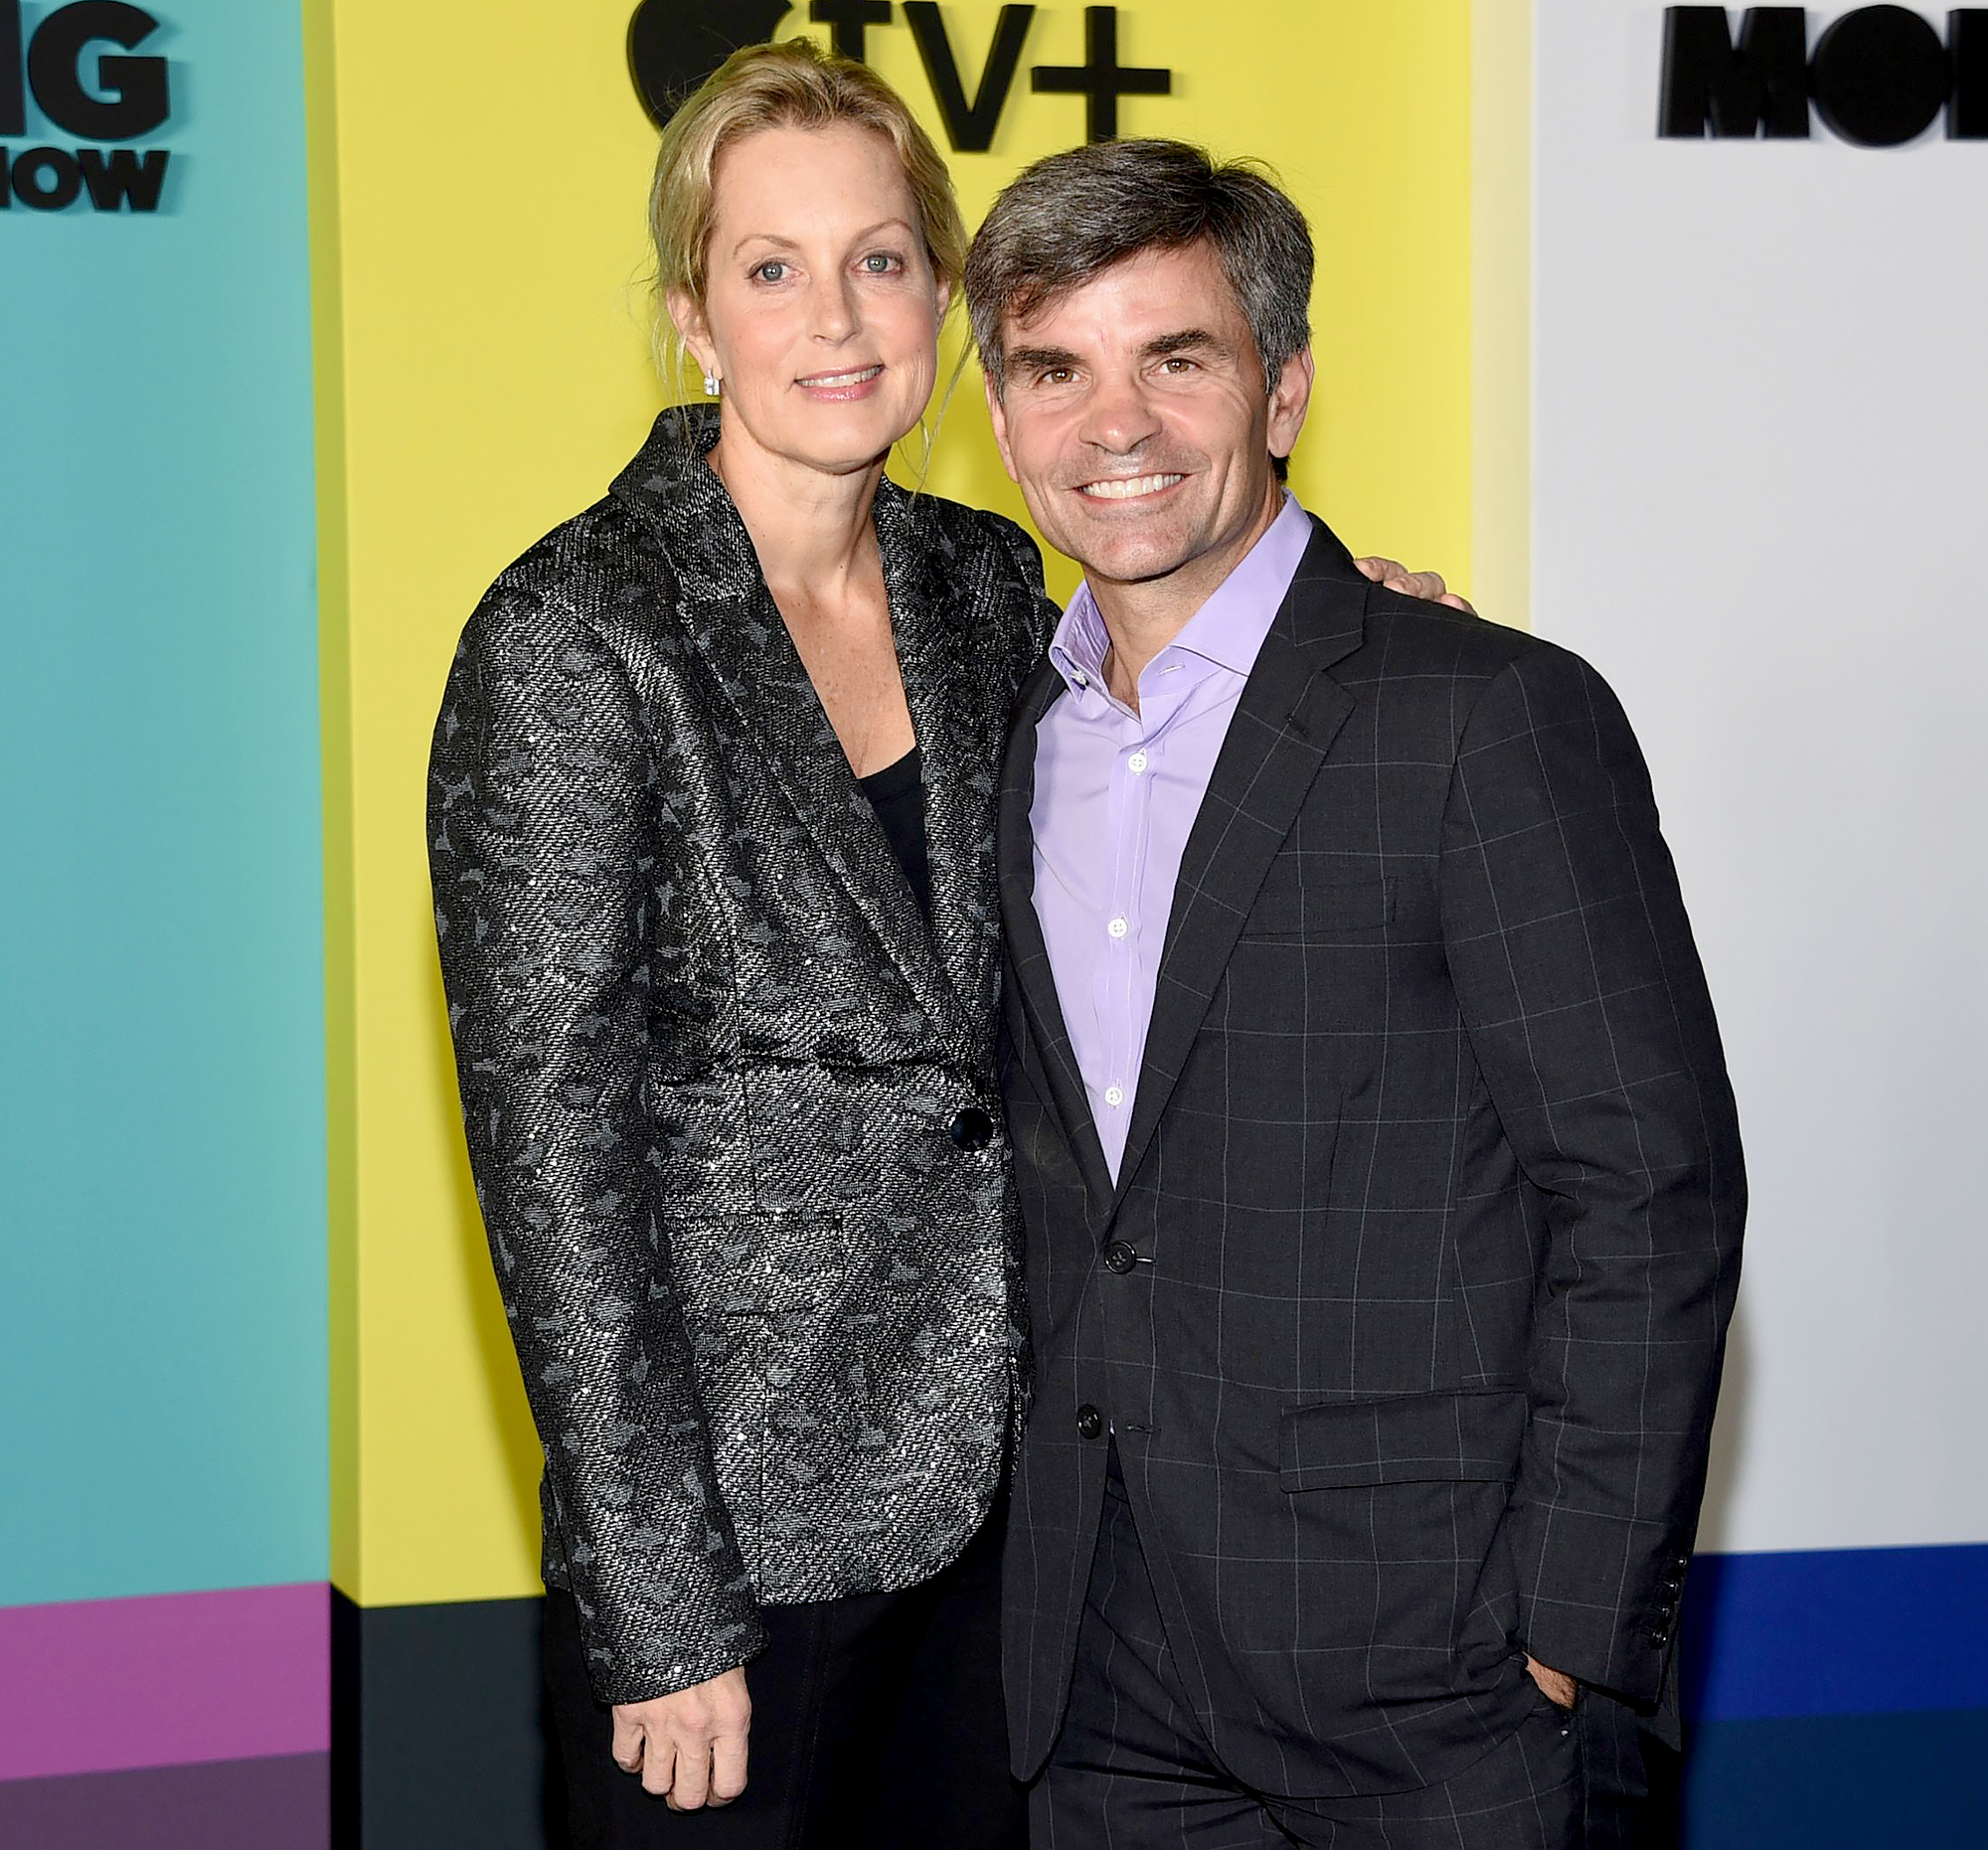 Ali Wentworth Calls Out George Stephanopolous for Downplaying 1st Date